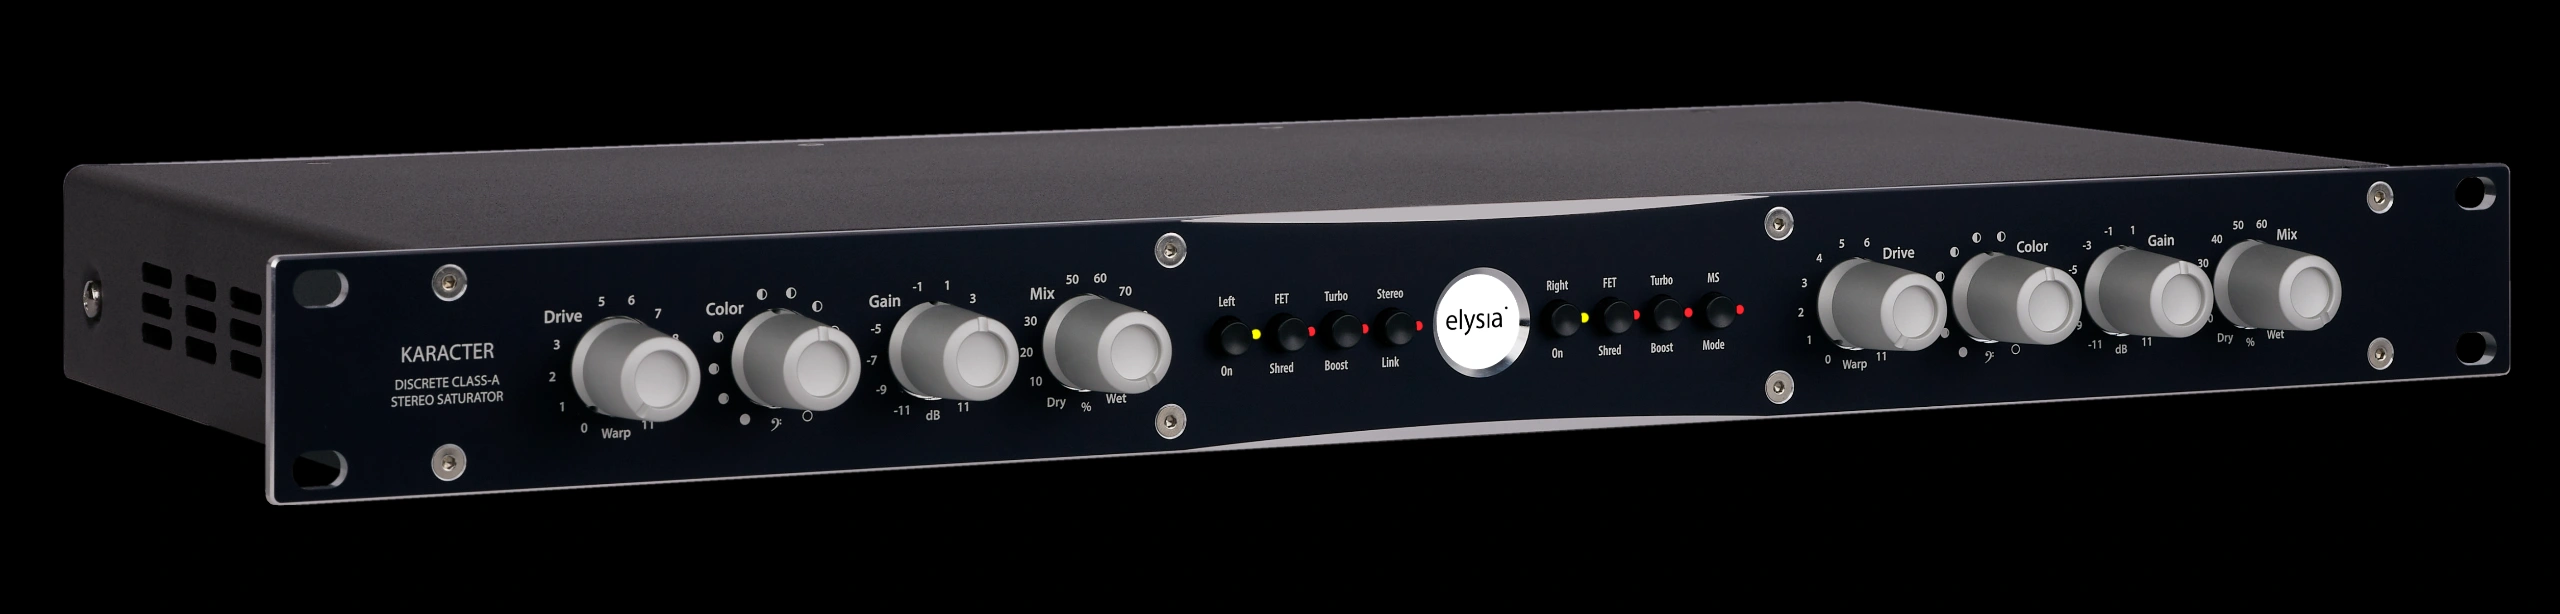 picture of the elysia karacter rack front with all controls and buttons.